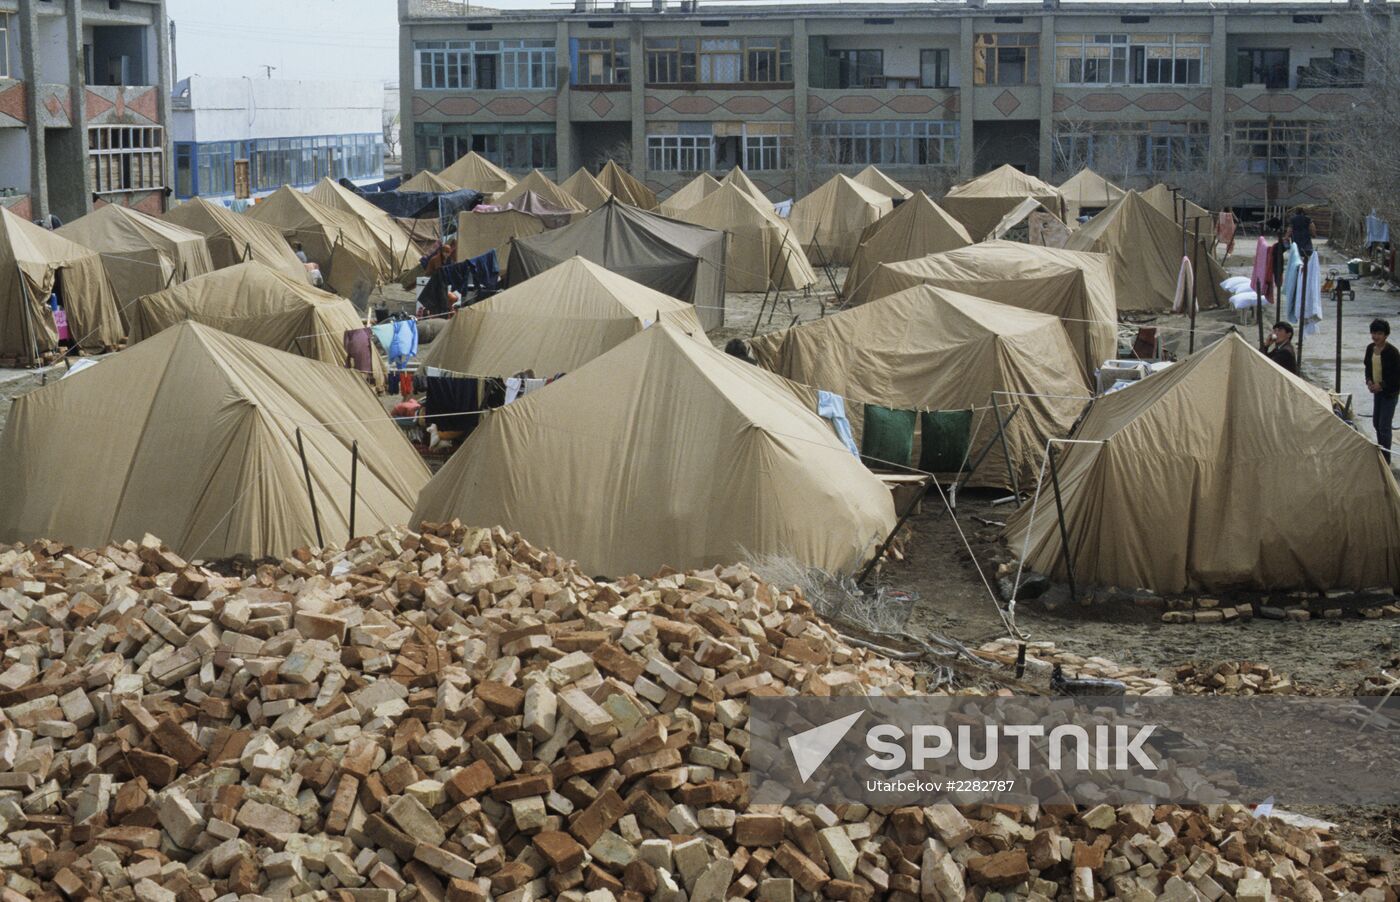 Tent camp in Gazli after the earthquake